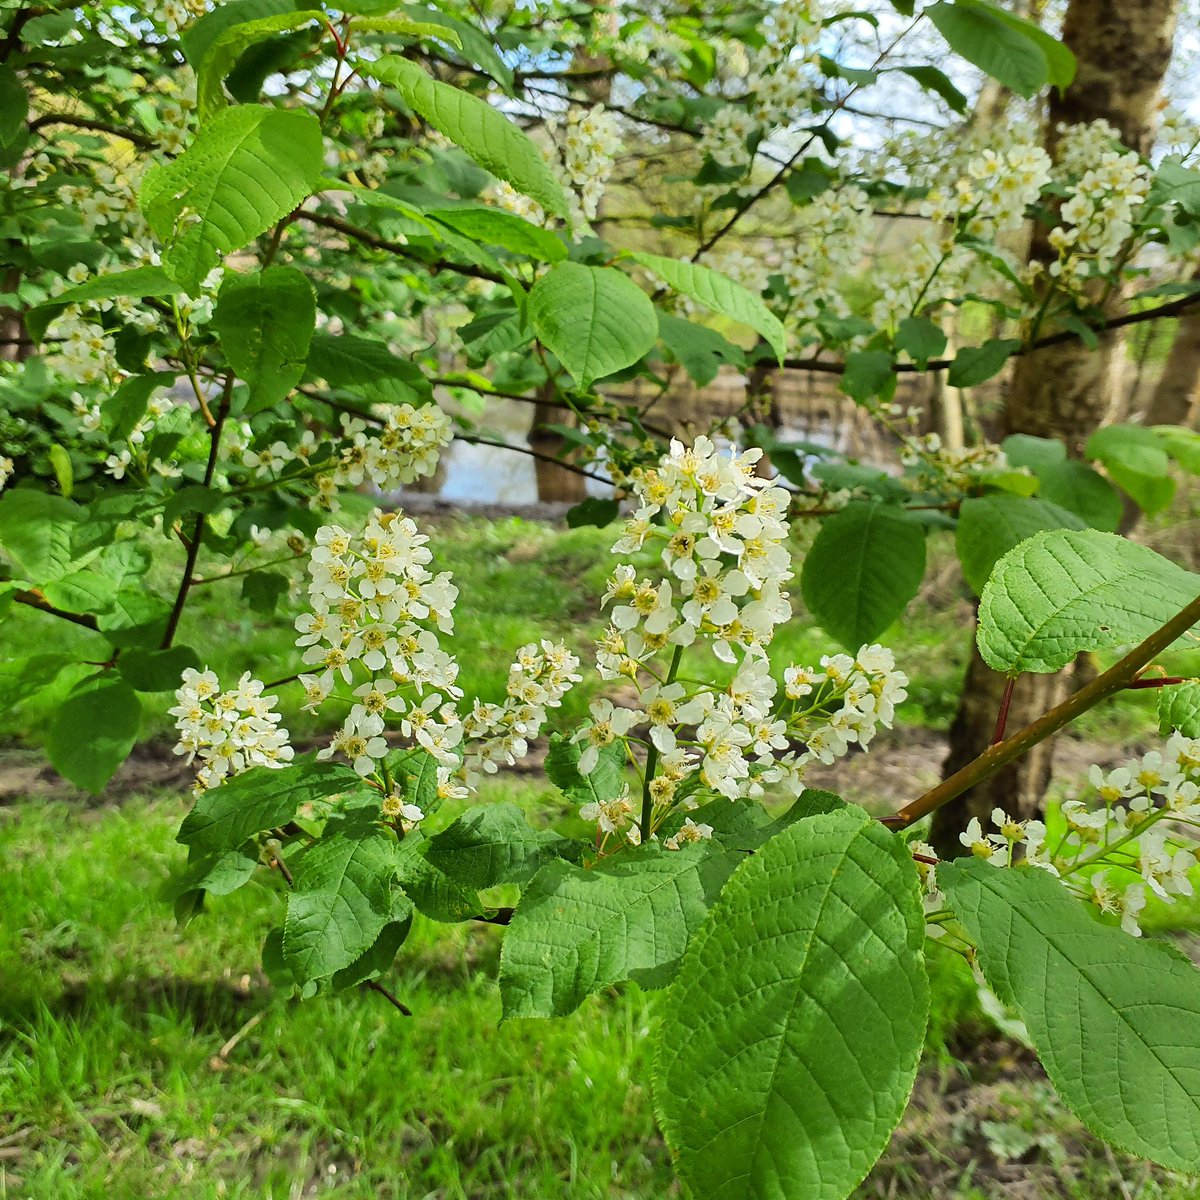 Bird Cherry flowering at the moment 💚 These delicate little flowers smell a bit like almonds and are in full bloom at the moment. Relentless rain has made working outside more difficult, but they prefer wetter soils and tend to grow in wet woodlands and along streams #BirdCherry